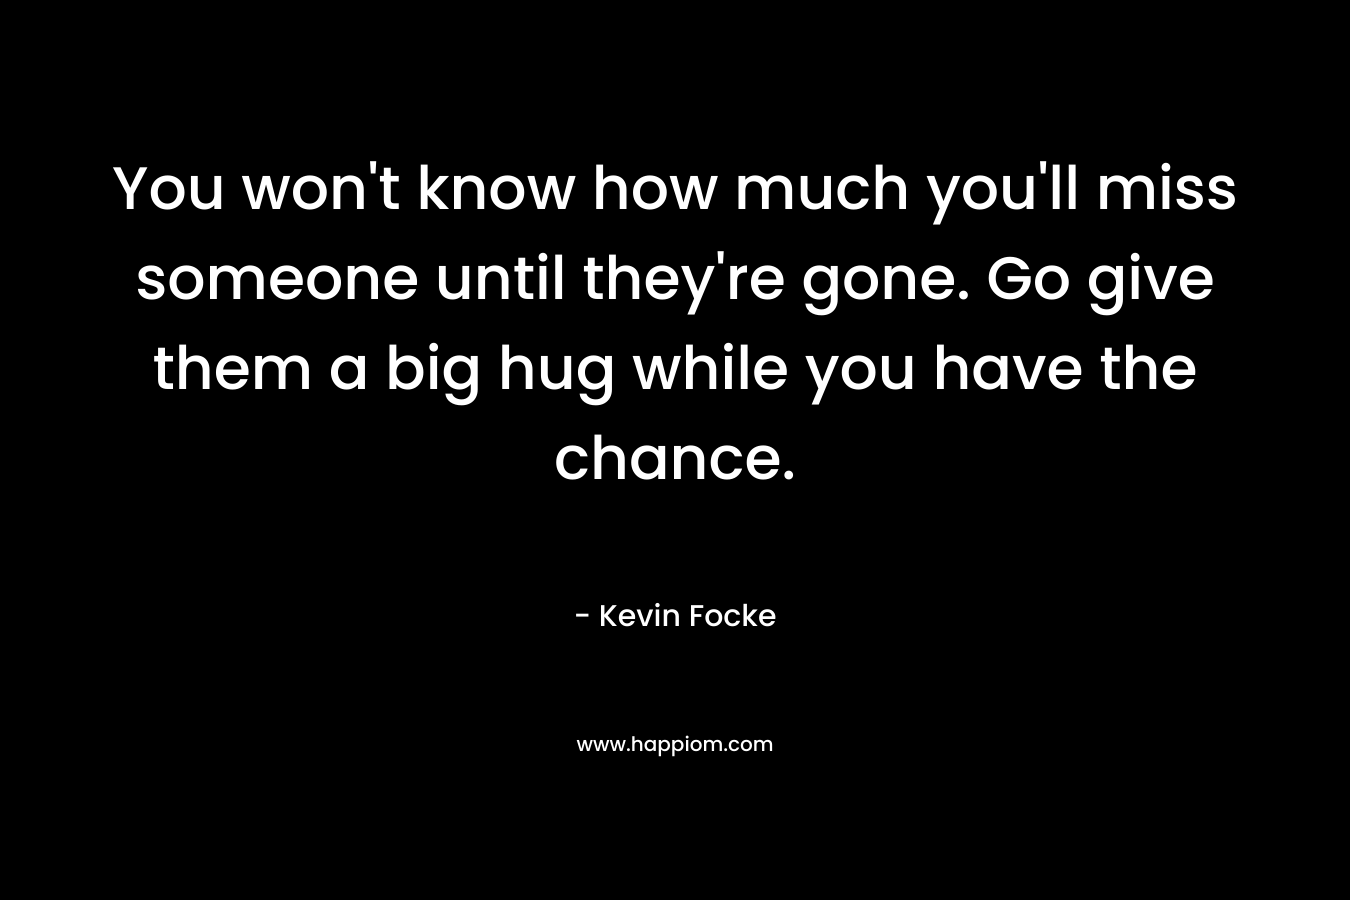 You won’t know how much you’ll miss someone until they’re gone. Go give them a big hug while you have the chance. – Kevin Focke